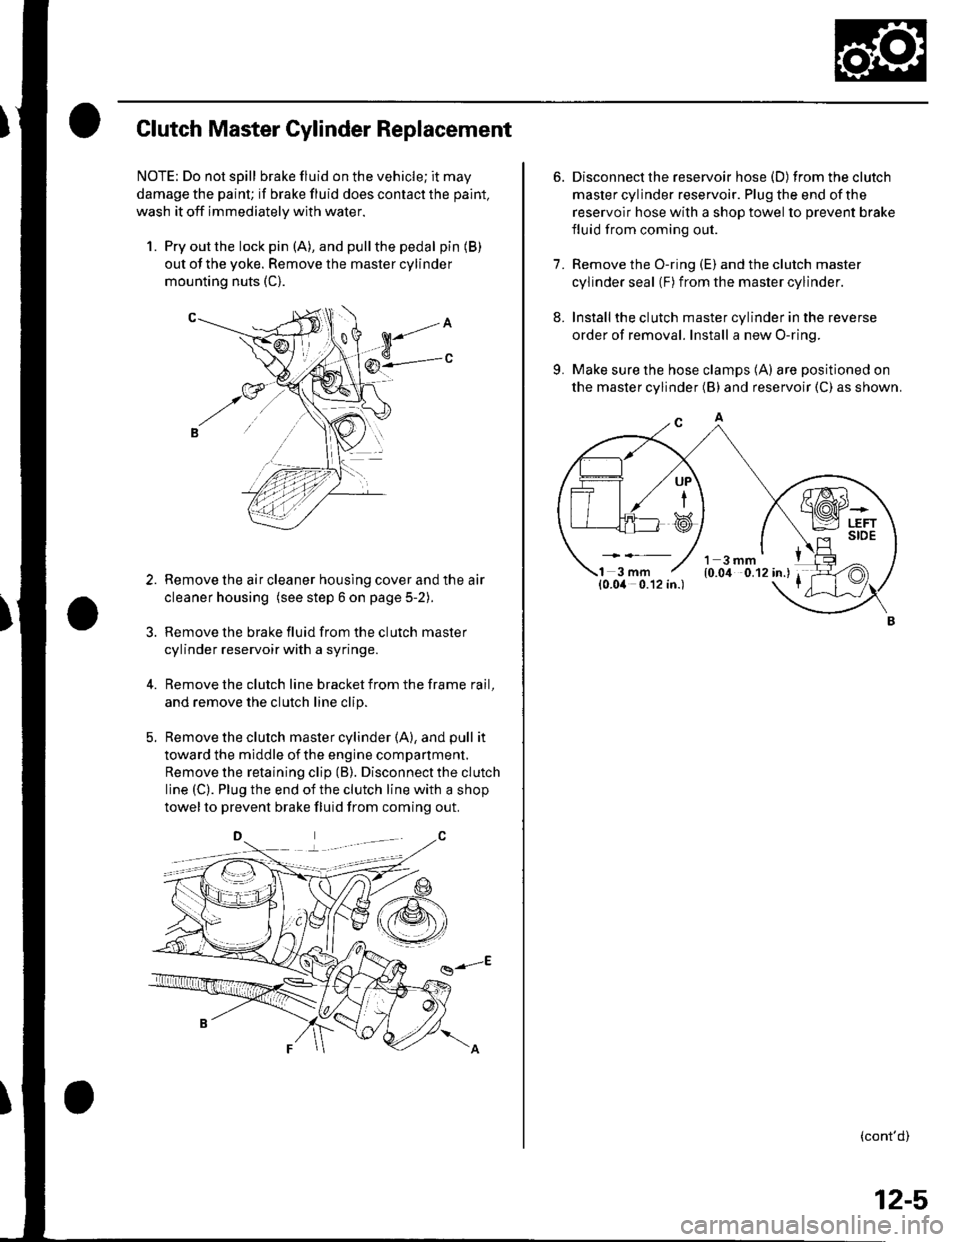 HONDA CIVIC 2003 7.G Workshop Manual Clutch Master Cylinder Replacement
NOTE: Do not spill brake fluid on the vehicle; it may
damage the paint; if brake fluid does contact the paint,
wash it off immediatelV with water.
1. Pry out the loc